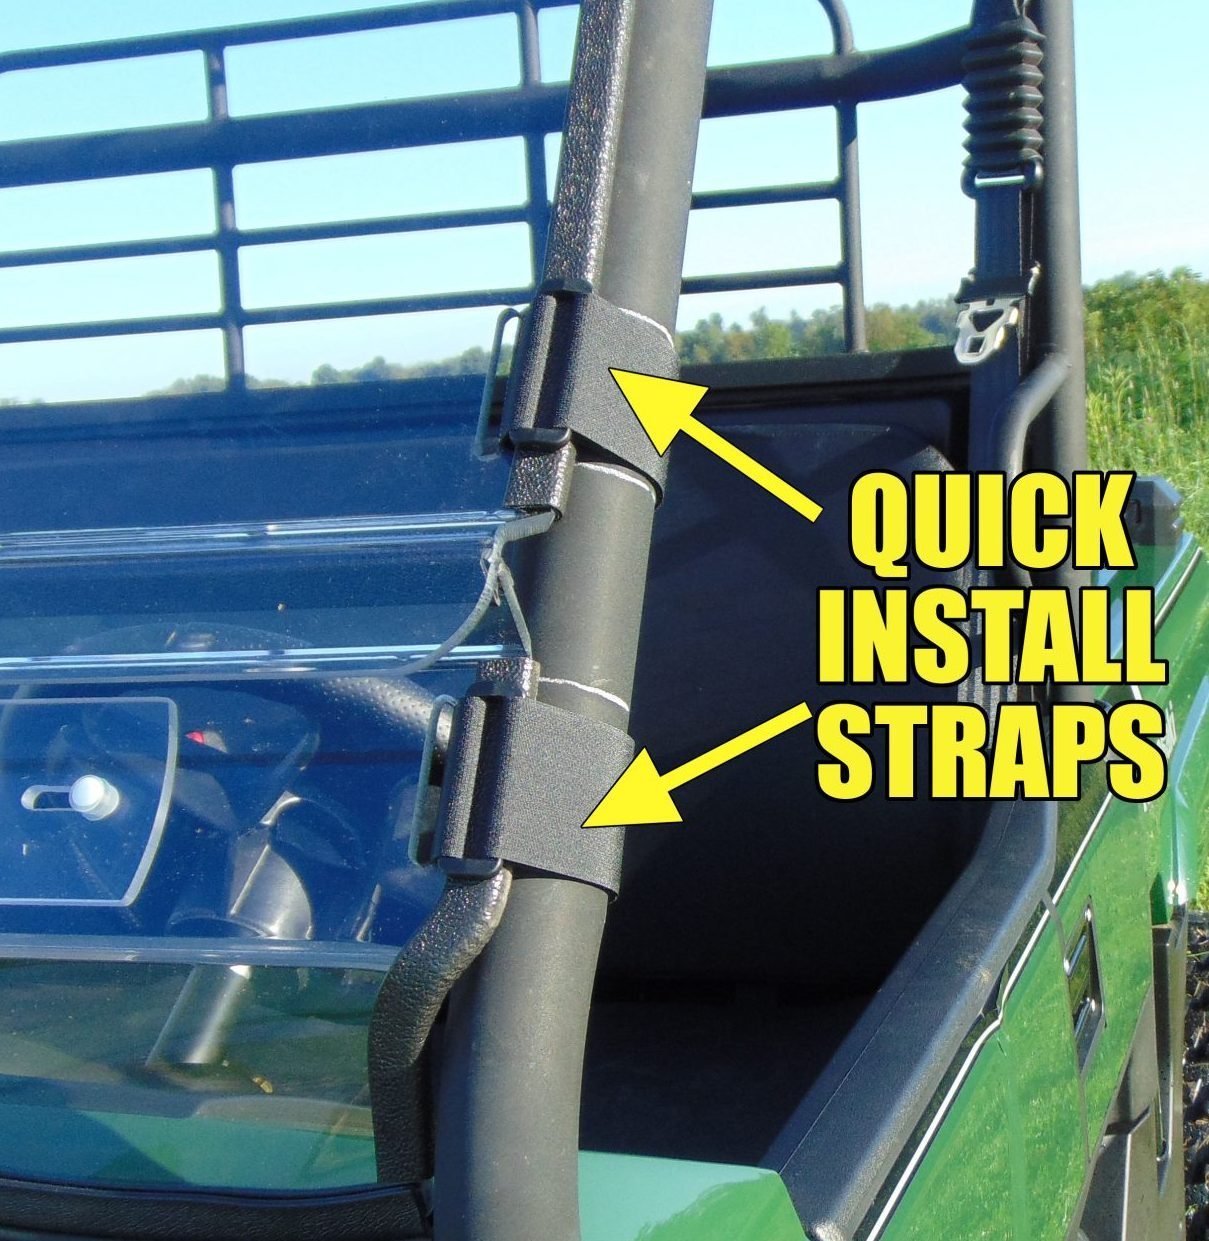 Arctic Cat Stampede - 1 Pc Windshield w/Hard Coat, Clamp, and Vent Options - 3 Star UTV